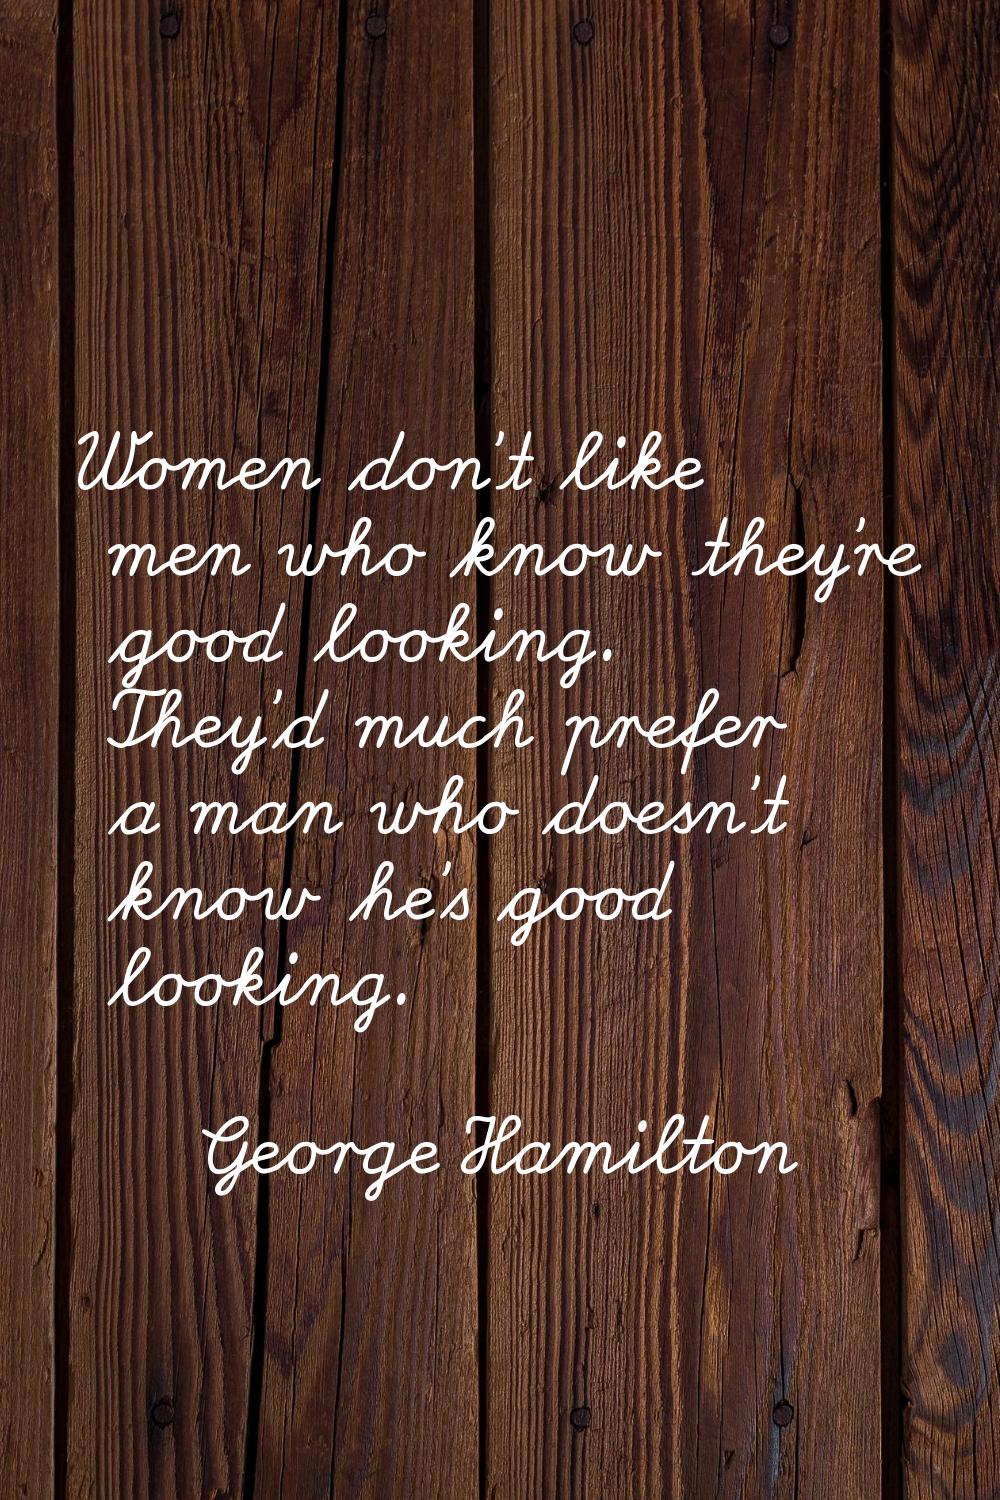 Women don't like men who know they're good looking. They'd much prefer a man who doesn't know he's 